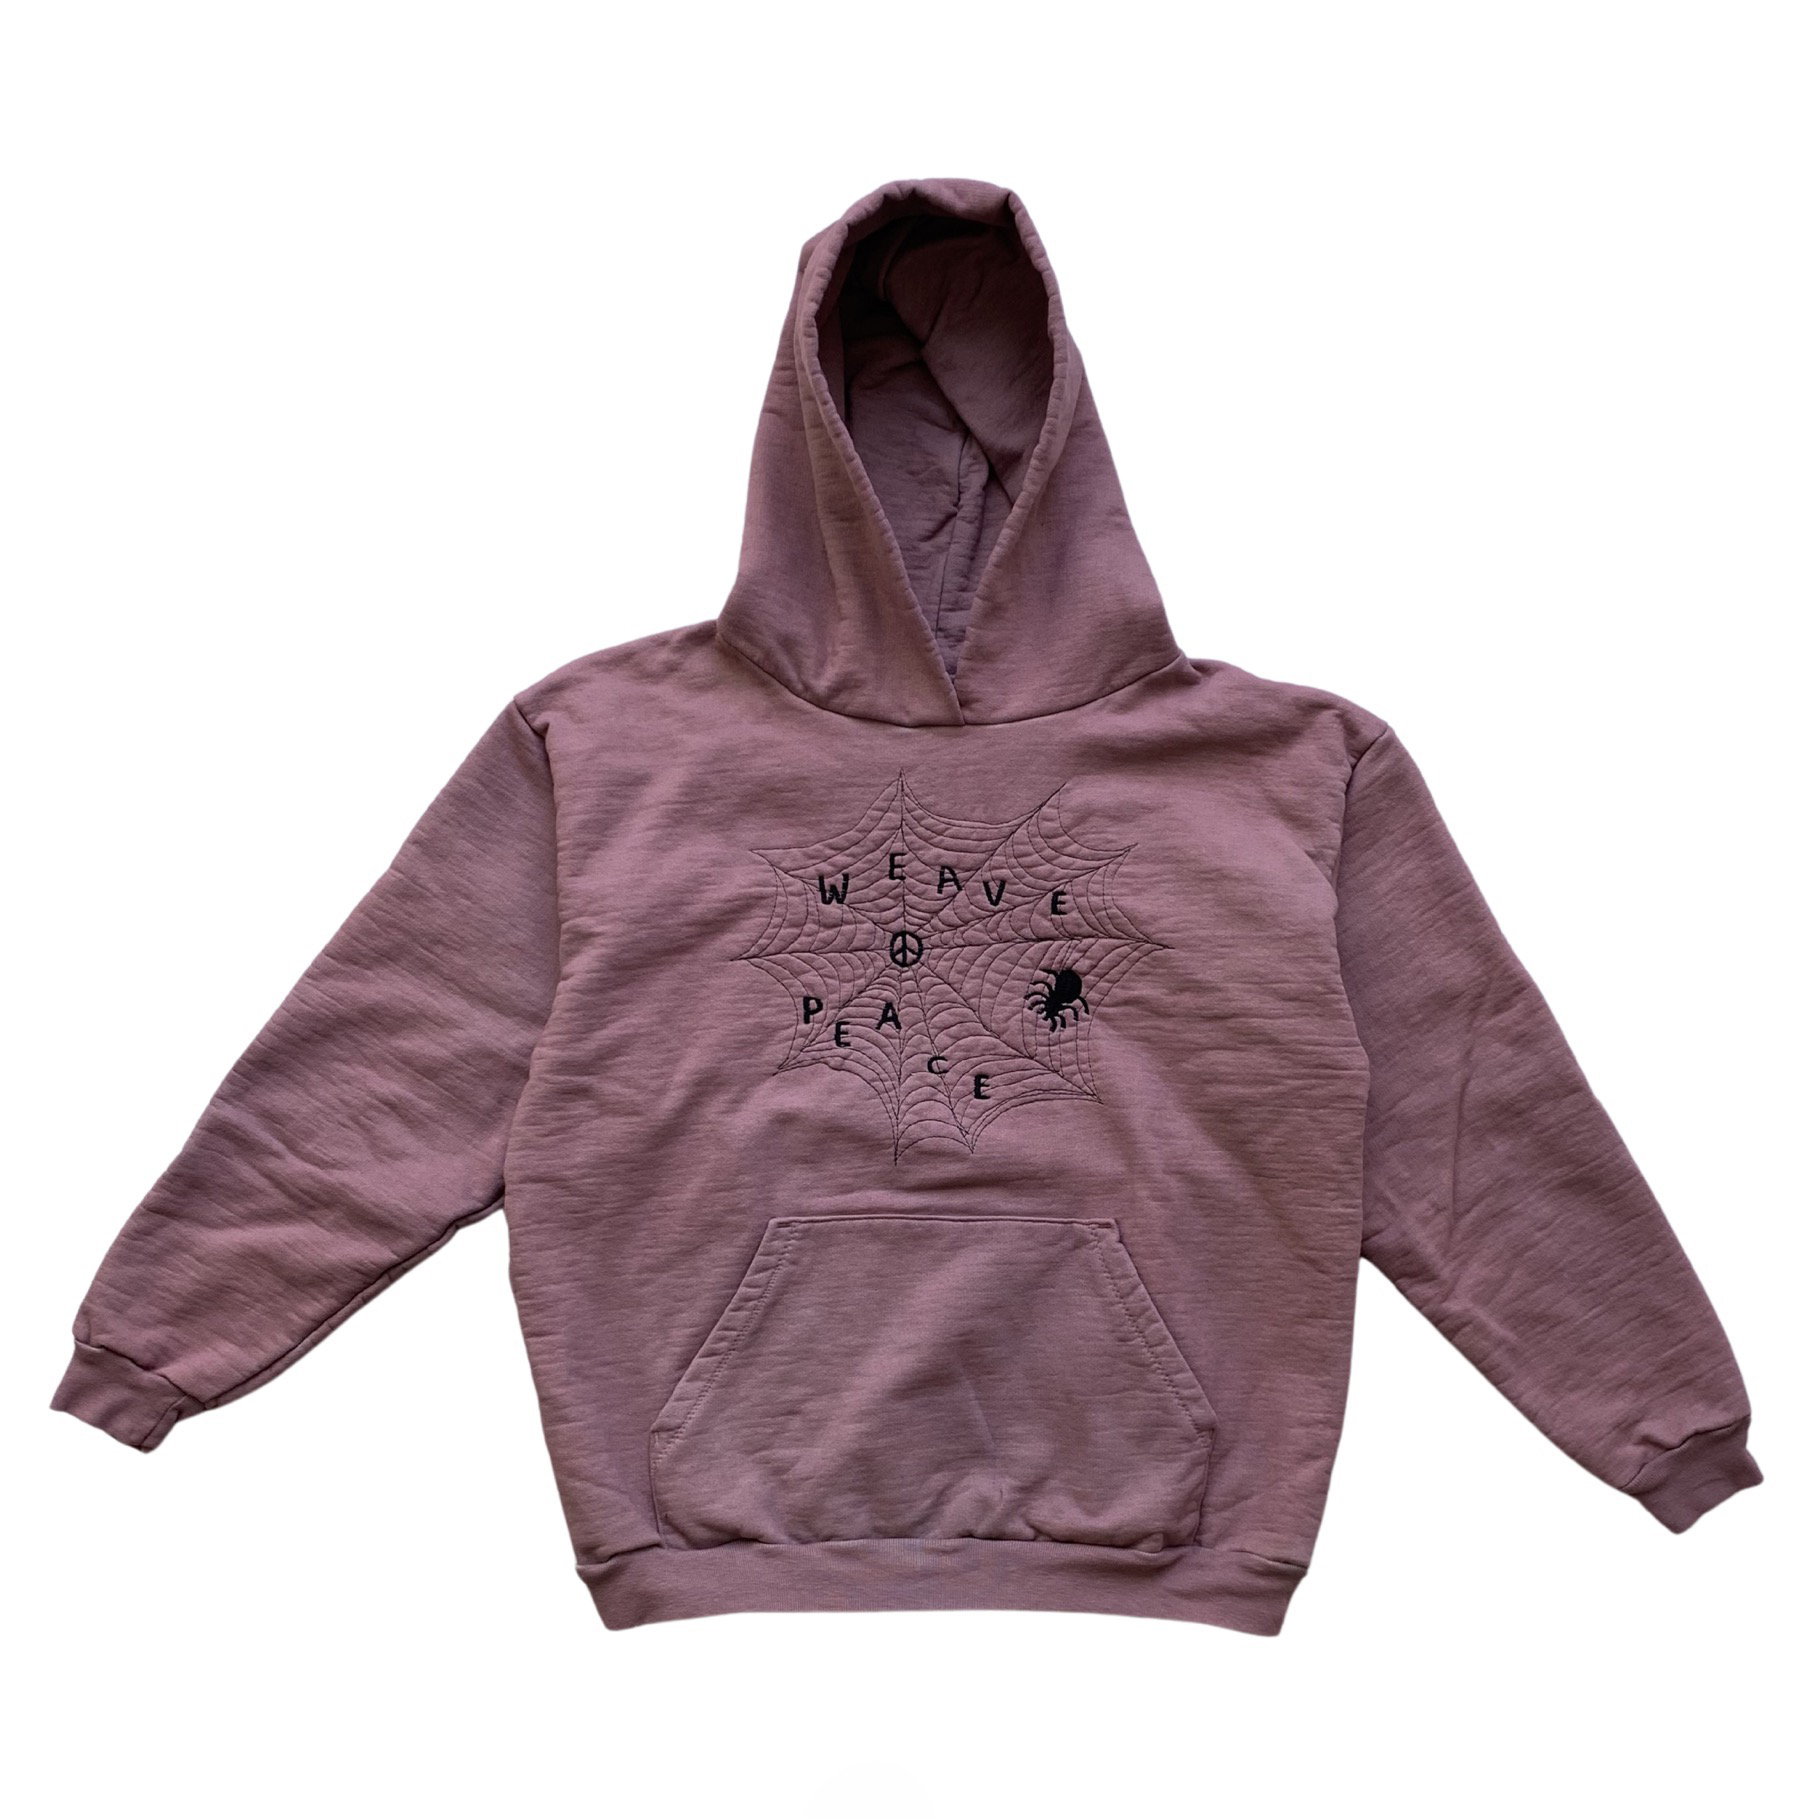 heavy fleece hoodie- organic usa cotton - garment dyed and embroidered - L